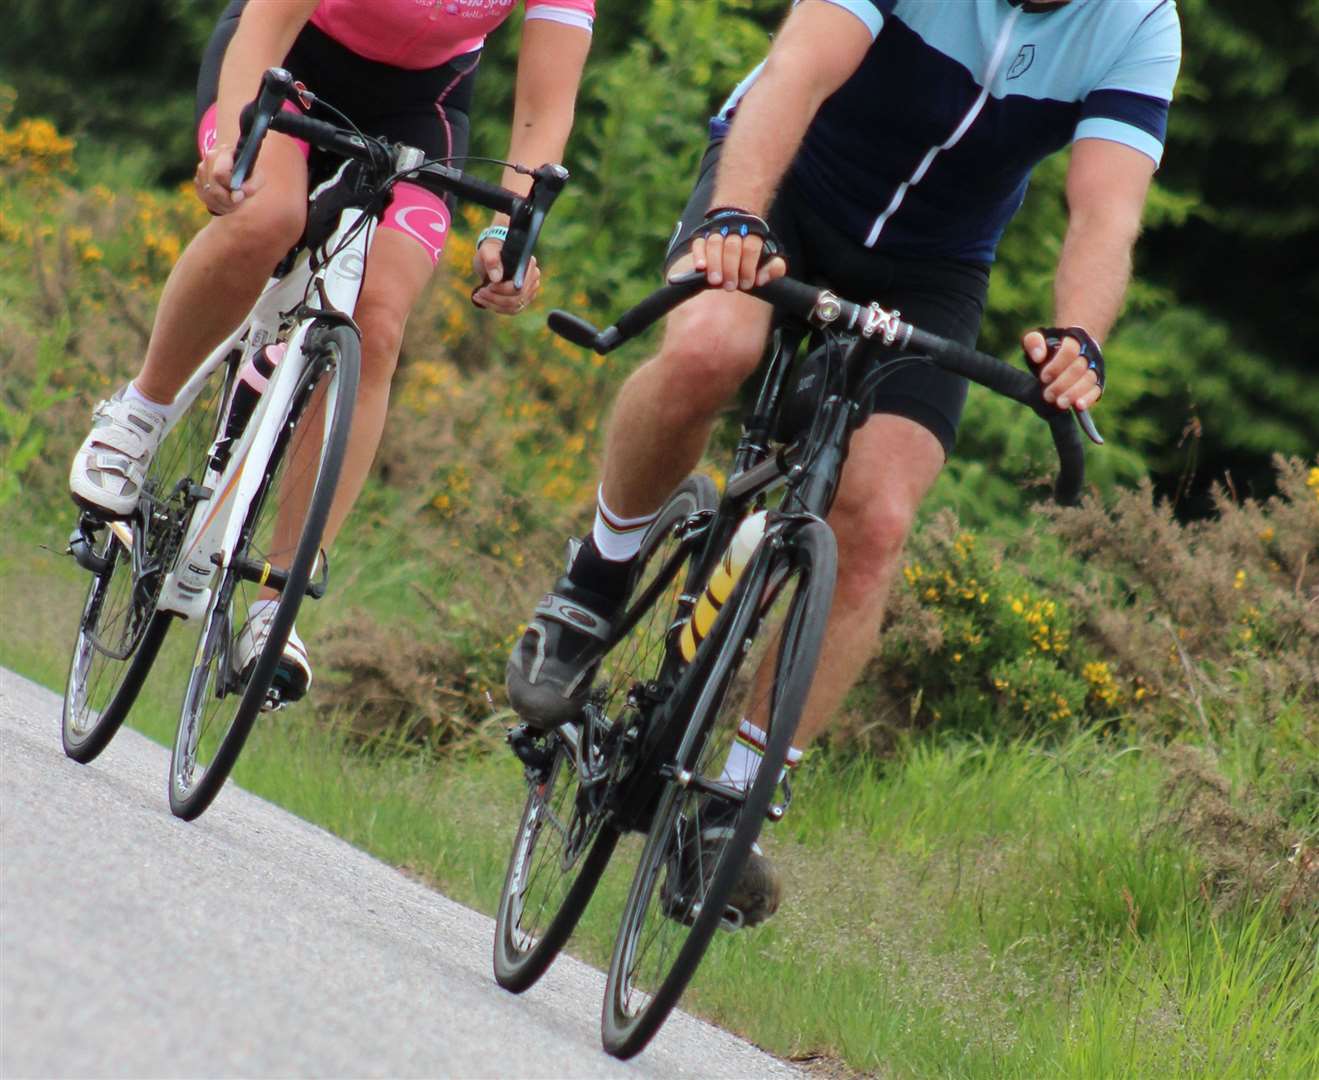 The Great Inverurie Bike Ride will operate within social distancing guidelines.